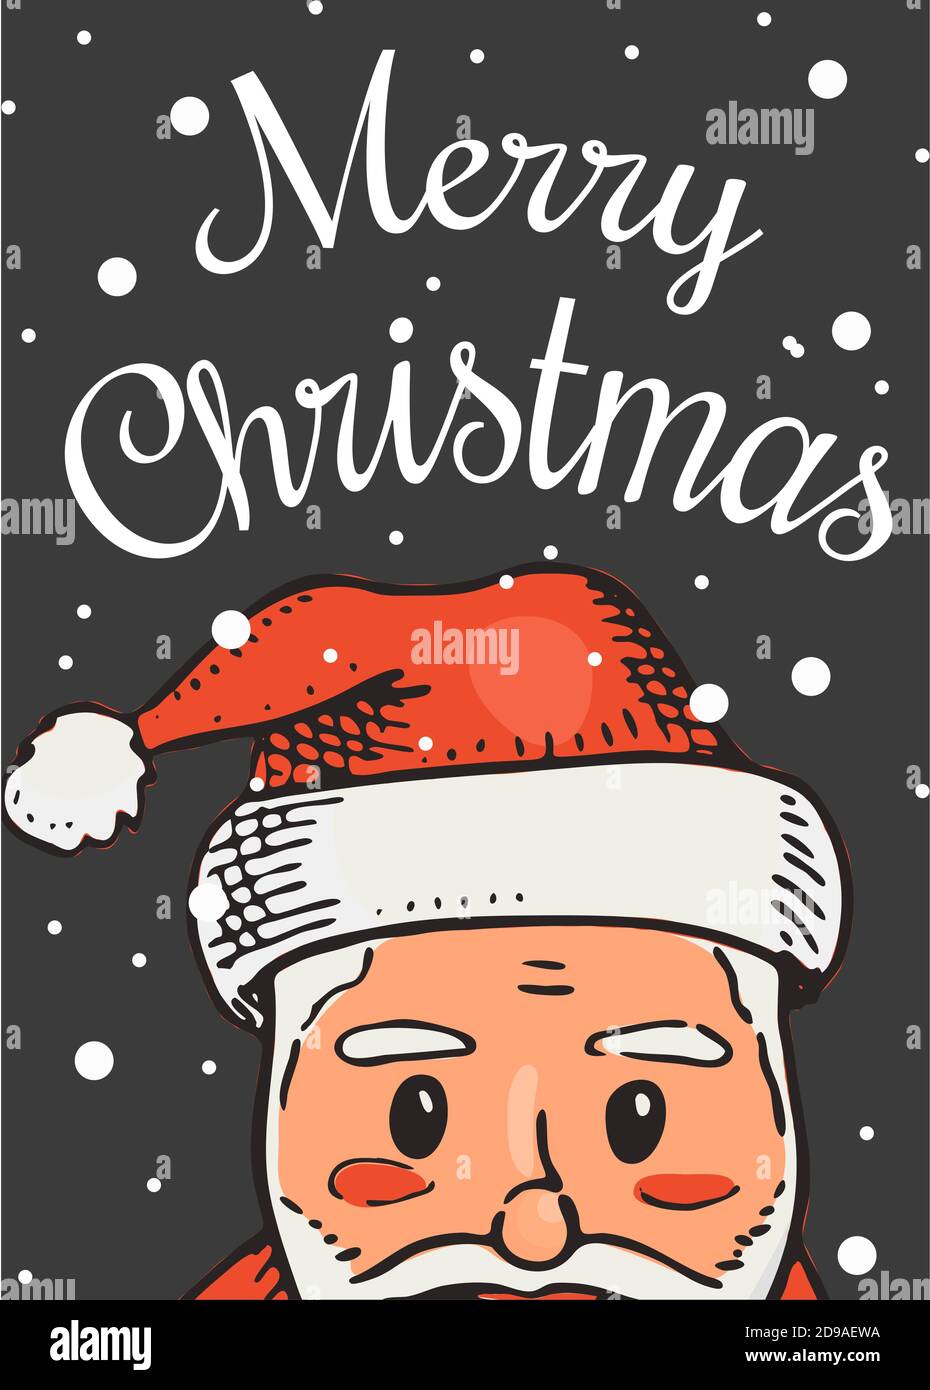 Merry Christmas banner. New Year sticky label. Poster template. Father Frost or Santa Claus for vintage sticker Flyer or labels. Engraved hand drawn Stock Vector